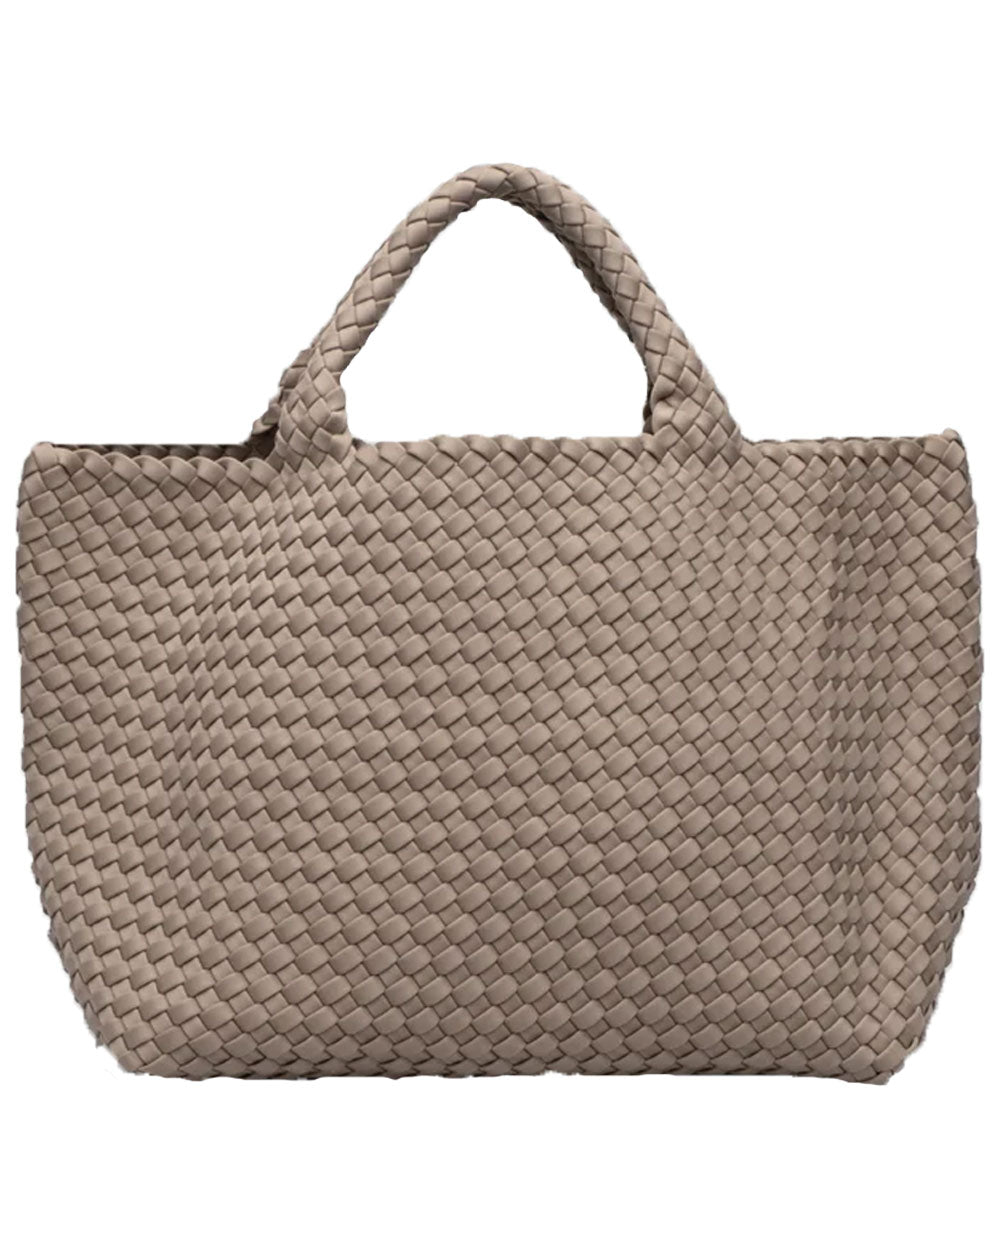 St. Barths Medium Tote in Cahsmere